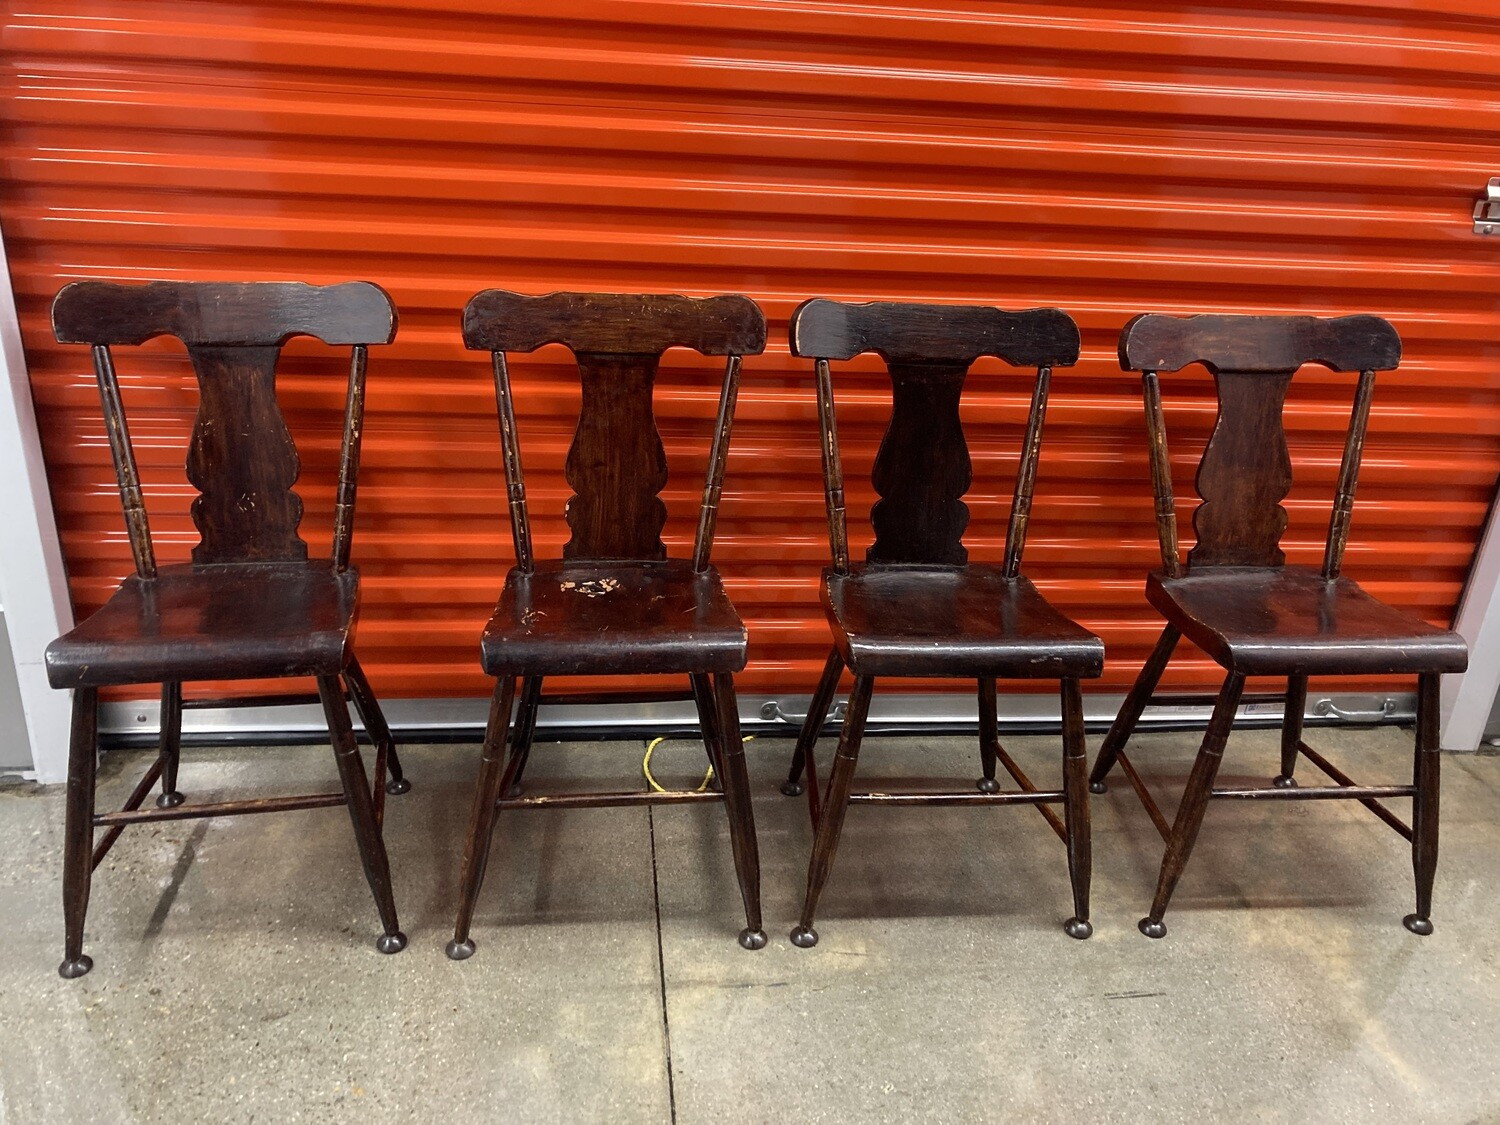 Set of 4 Vintage "Fiddle back" Chairs #1365